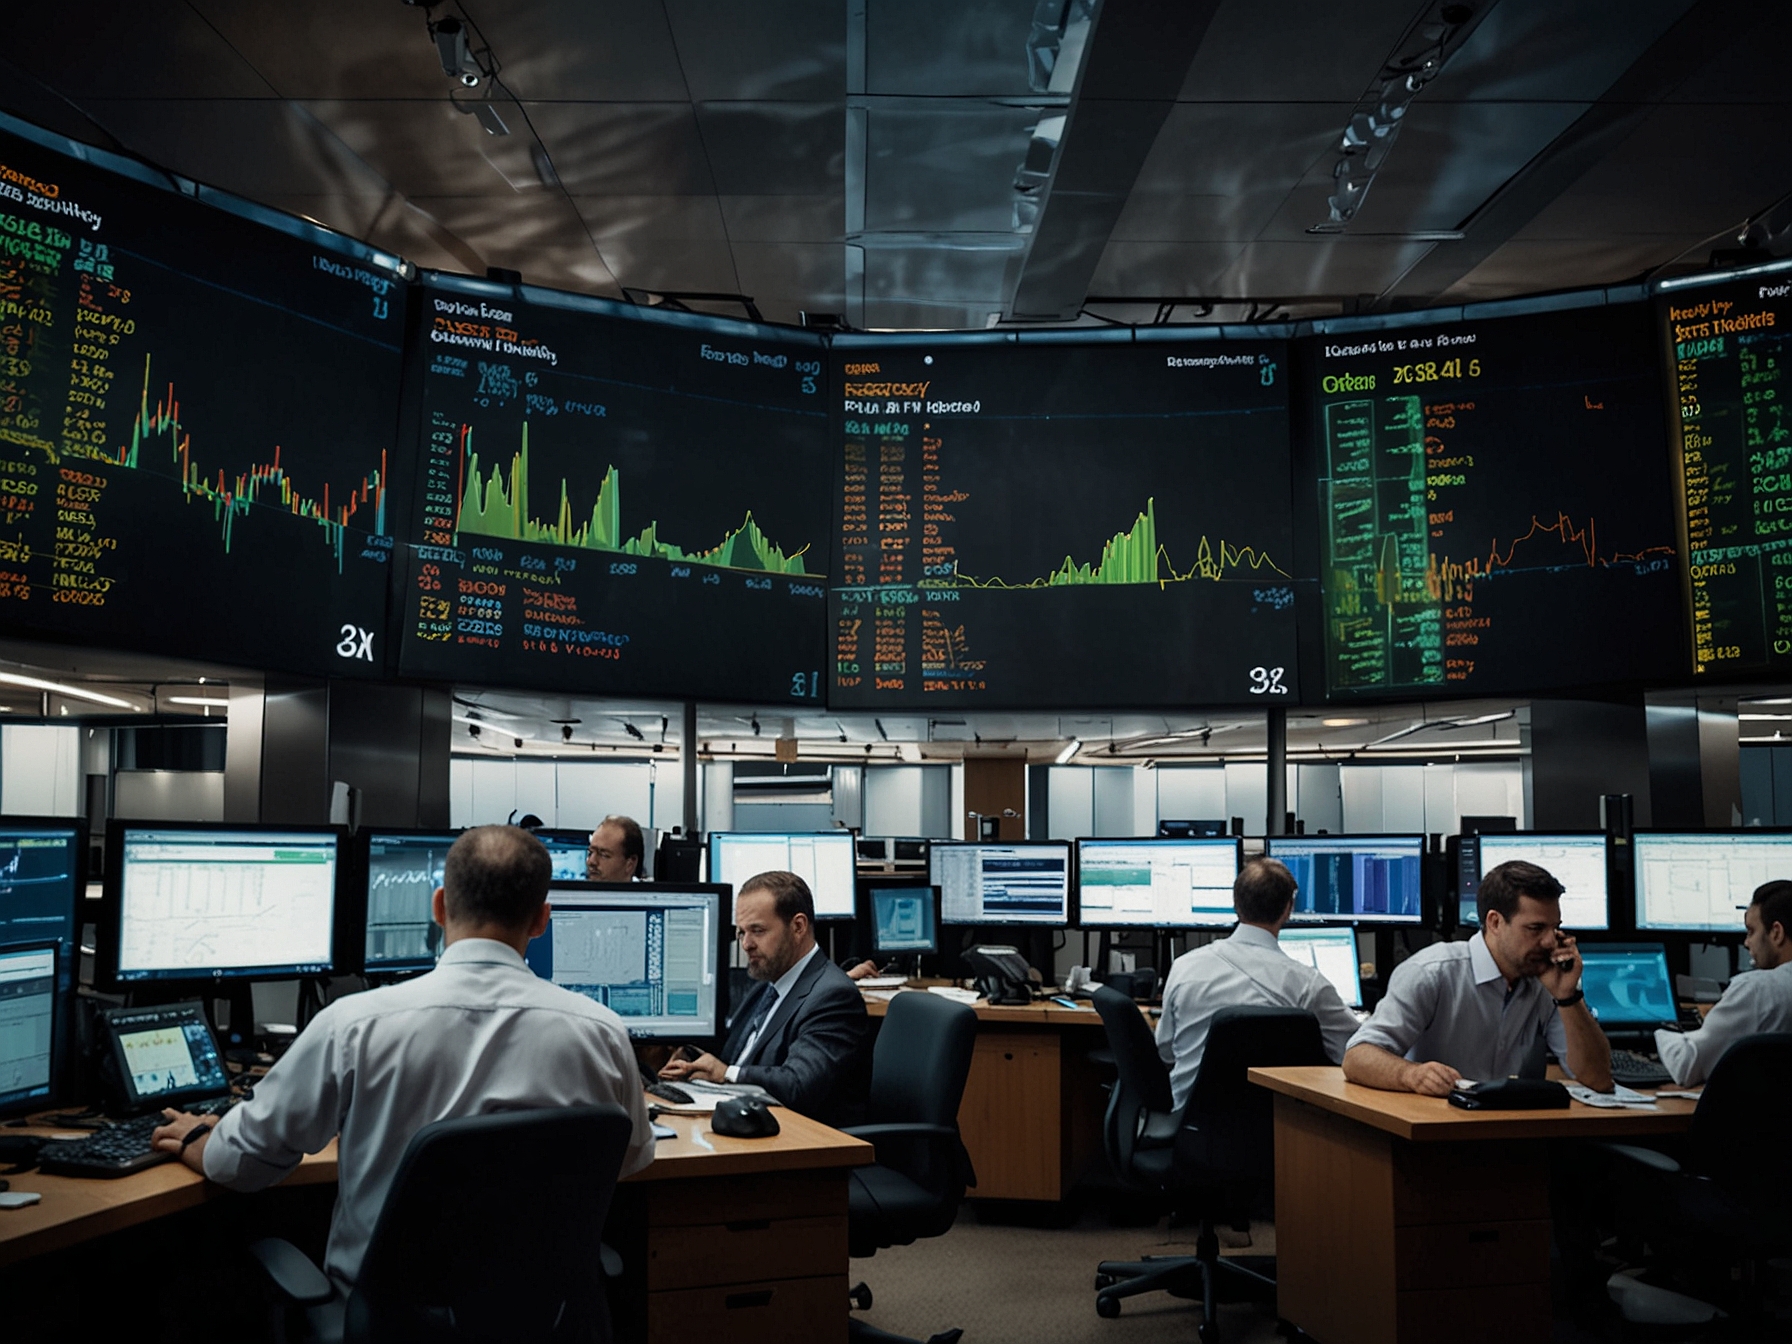 Traders at the New Zealand Stock Exchange working during the busy trading session characterized by high turnover and activity, symbolizing the proactive management and adjustments spurred by the index reweighting.